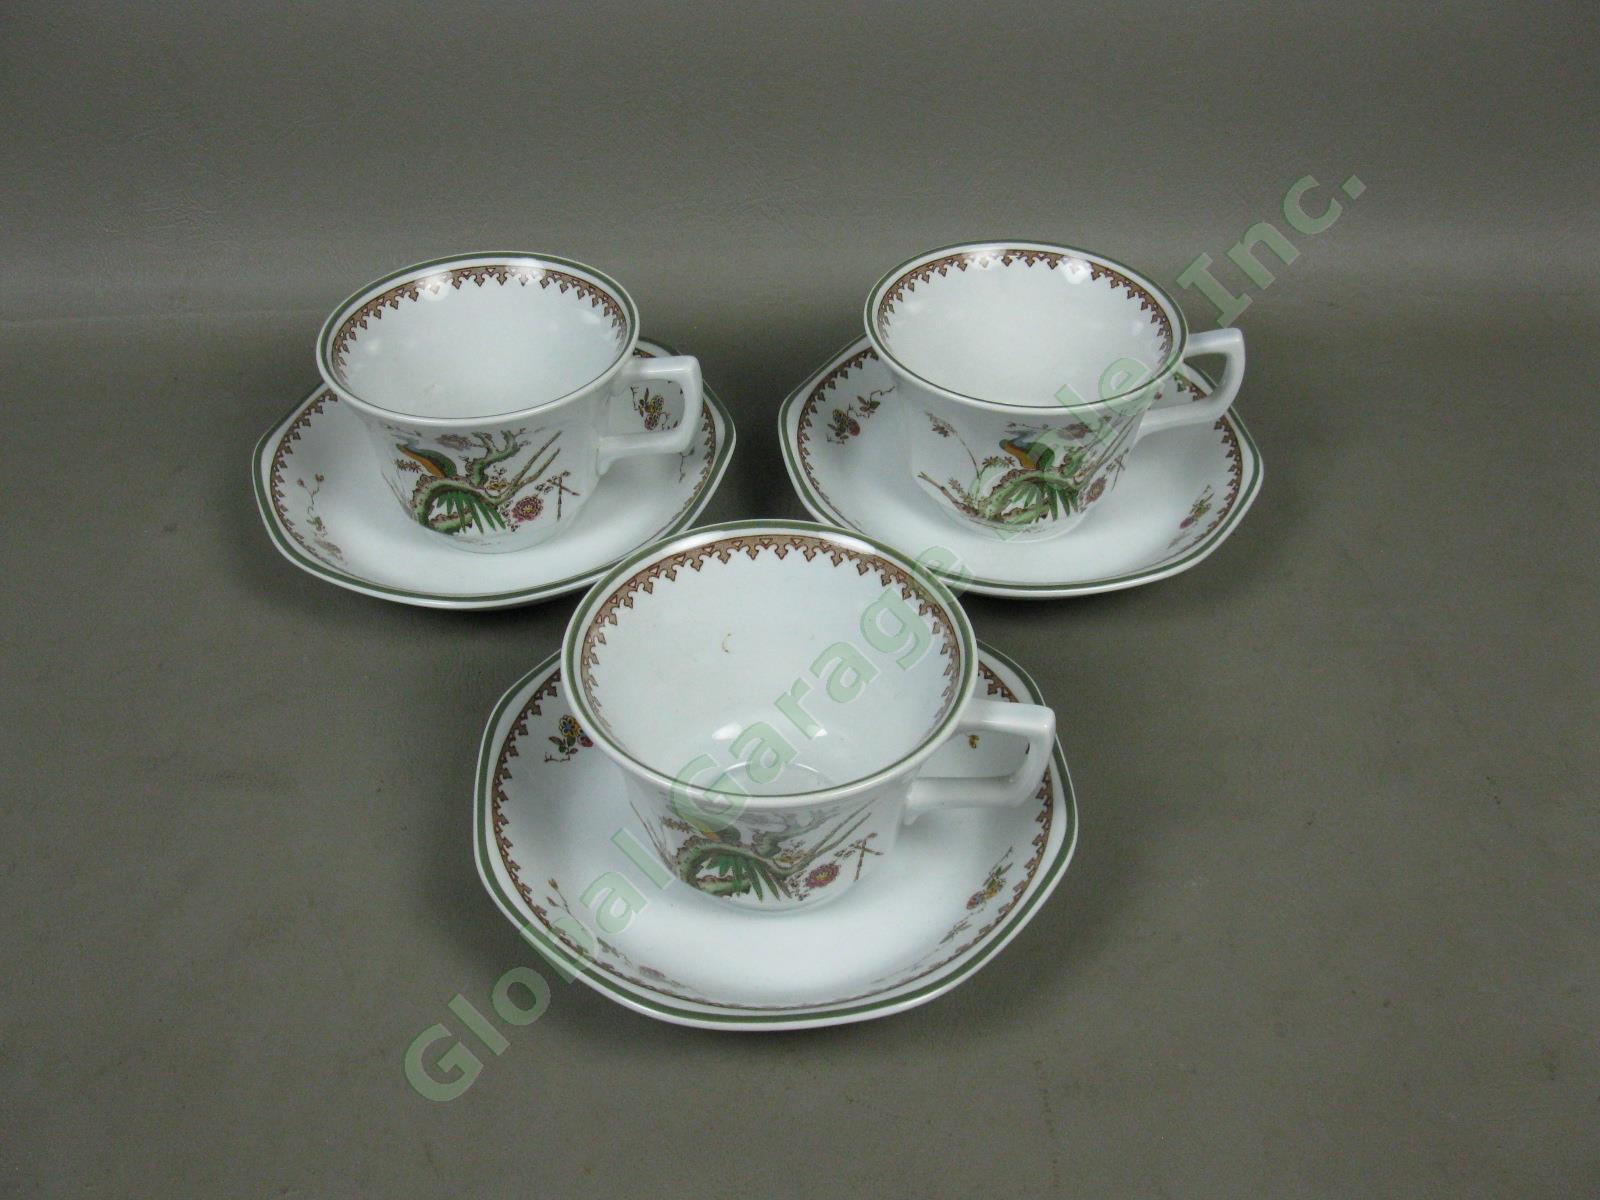 Wedgwood Old Chelsea Lot Dinner Salad Luncheon Bread Dessert Plates Cups Saucers 1